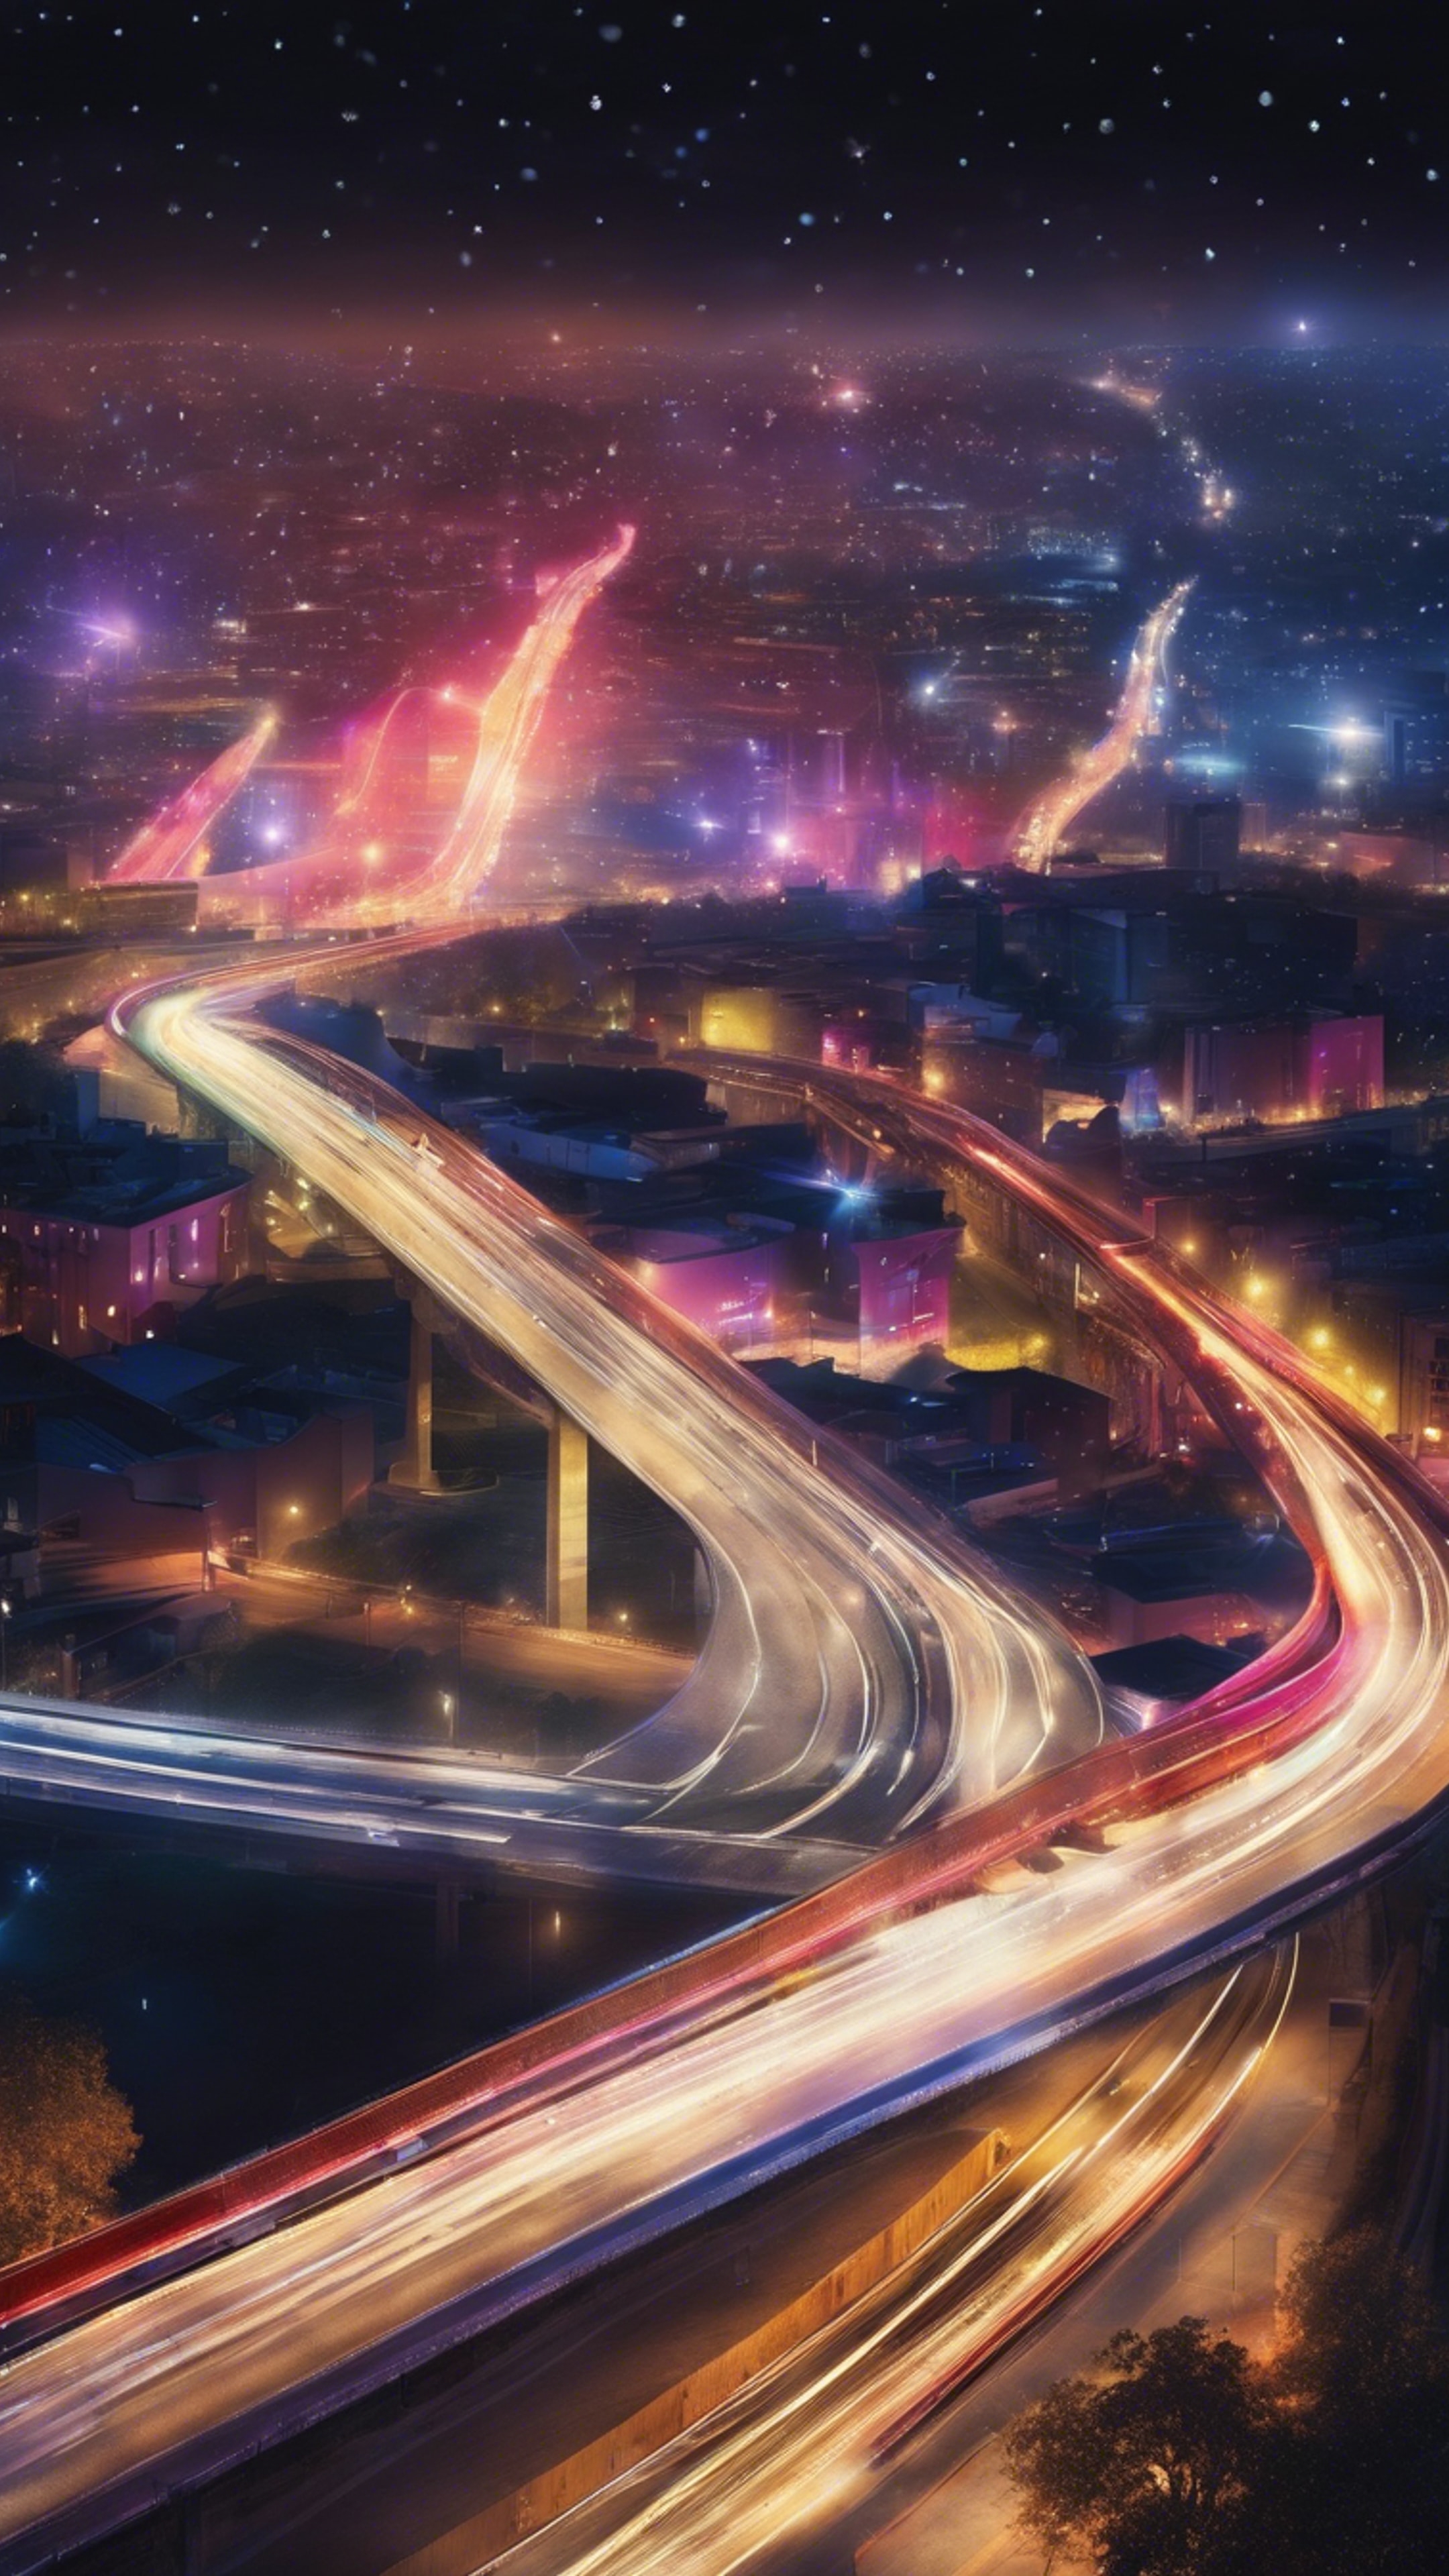 A lustrous highway painting a ribbon of light through the city under the vivid colors of a nocturnal sky. Tapeta na zeď[7f6125f7f59b411d957d]